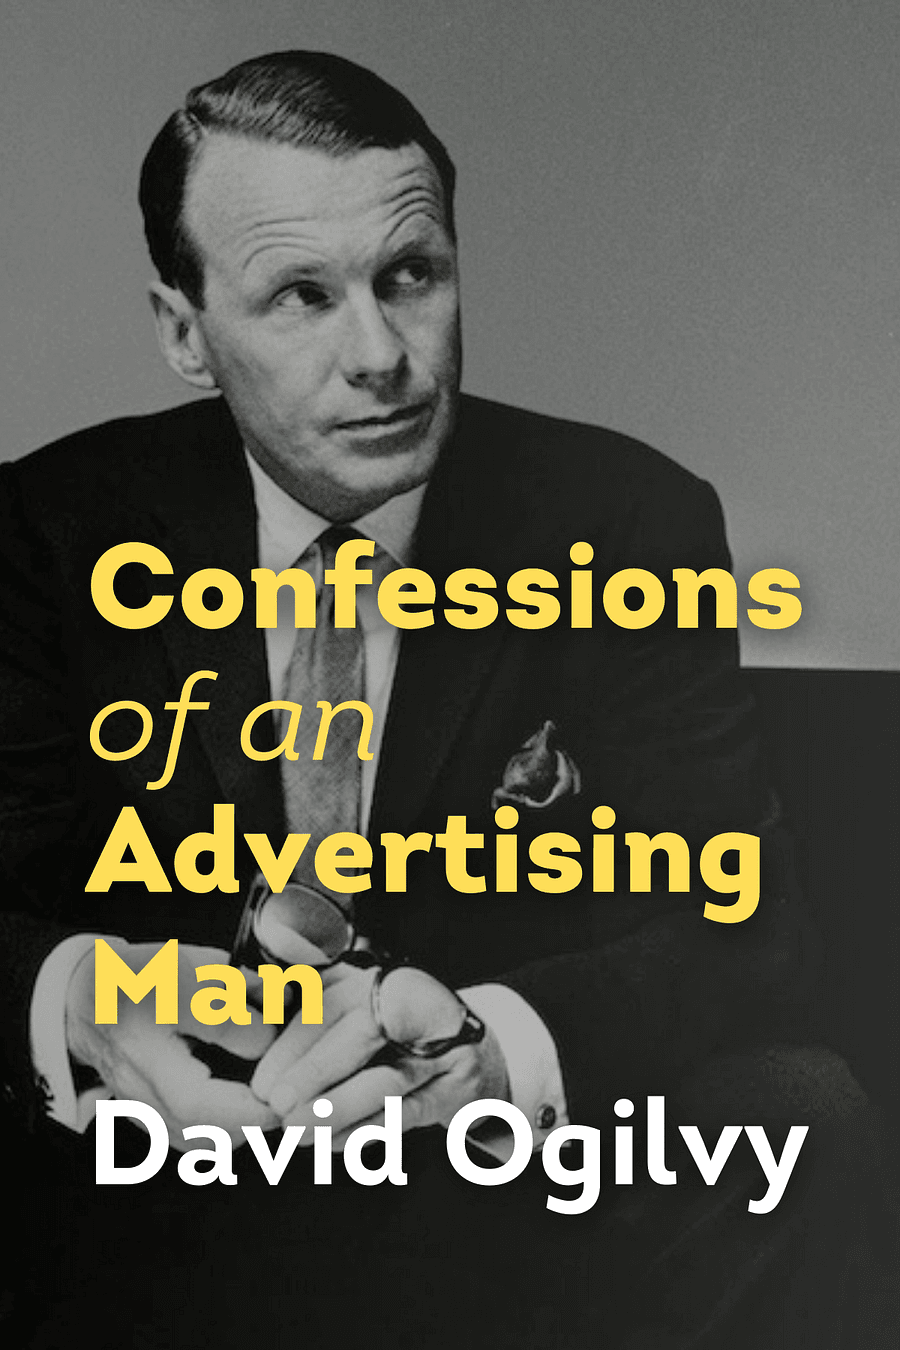 Confessions of an Advertising Man by David Ogilvy - Book Summary